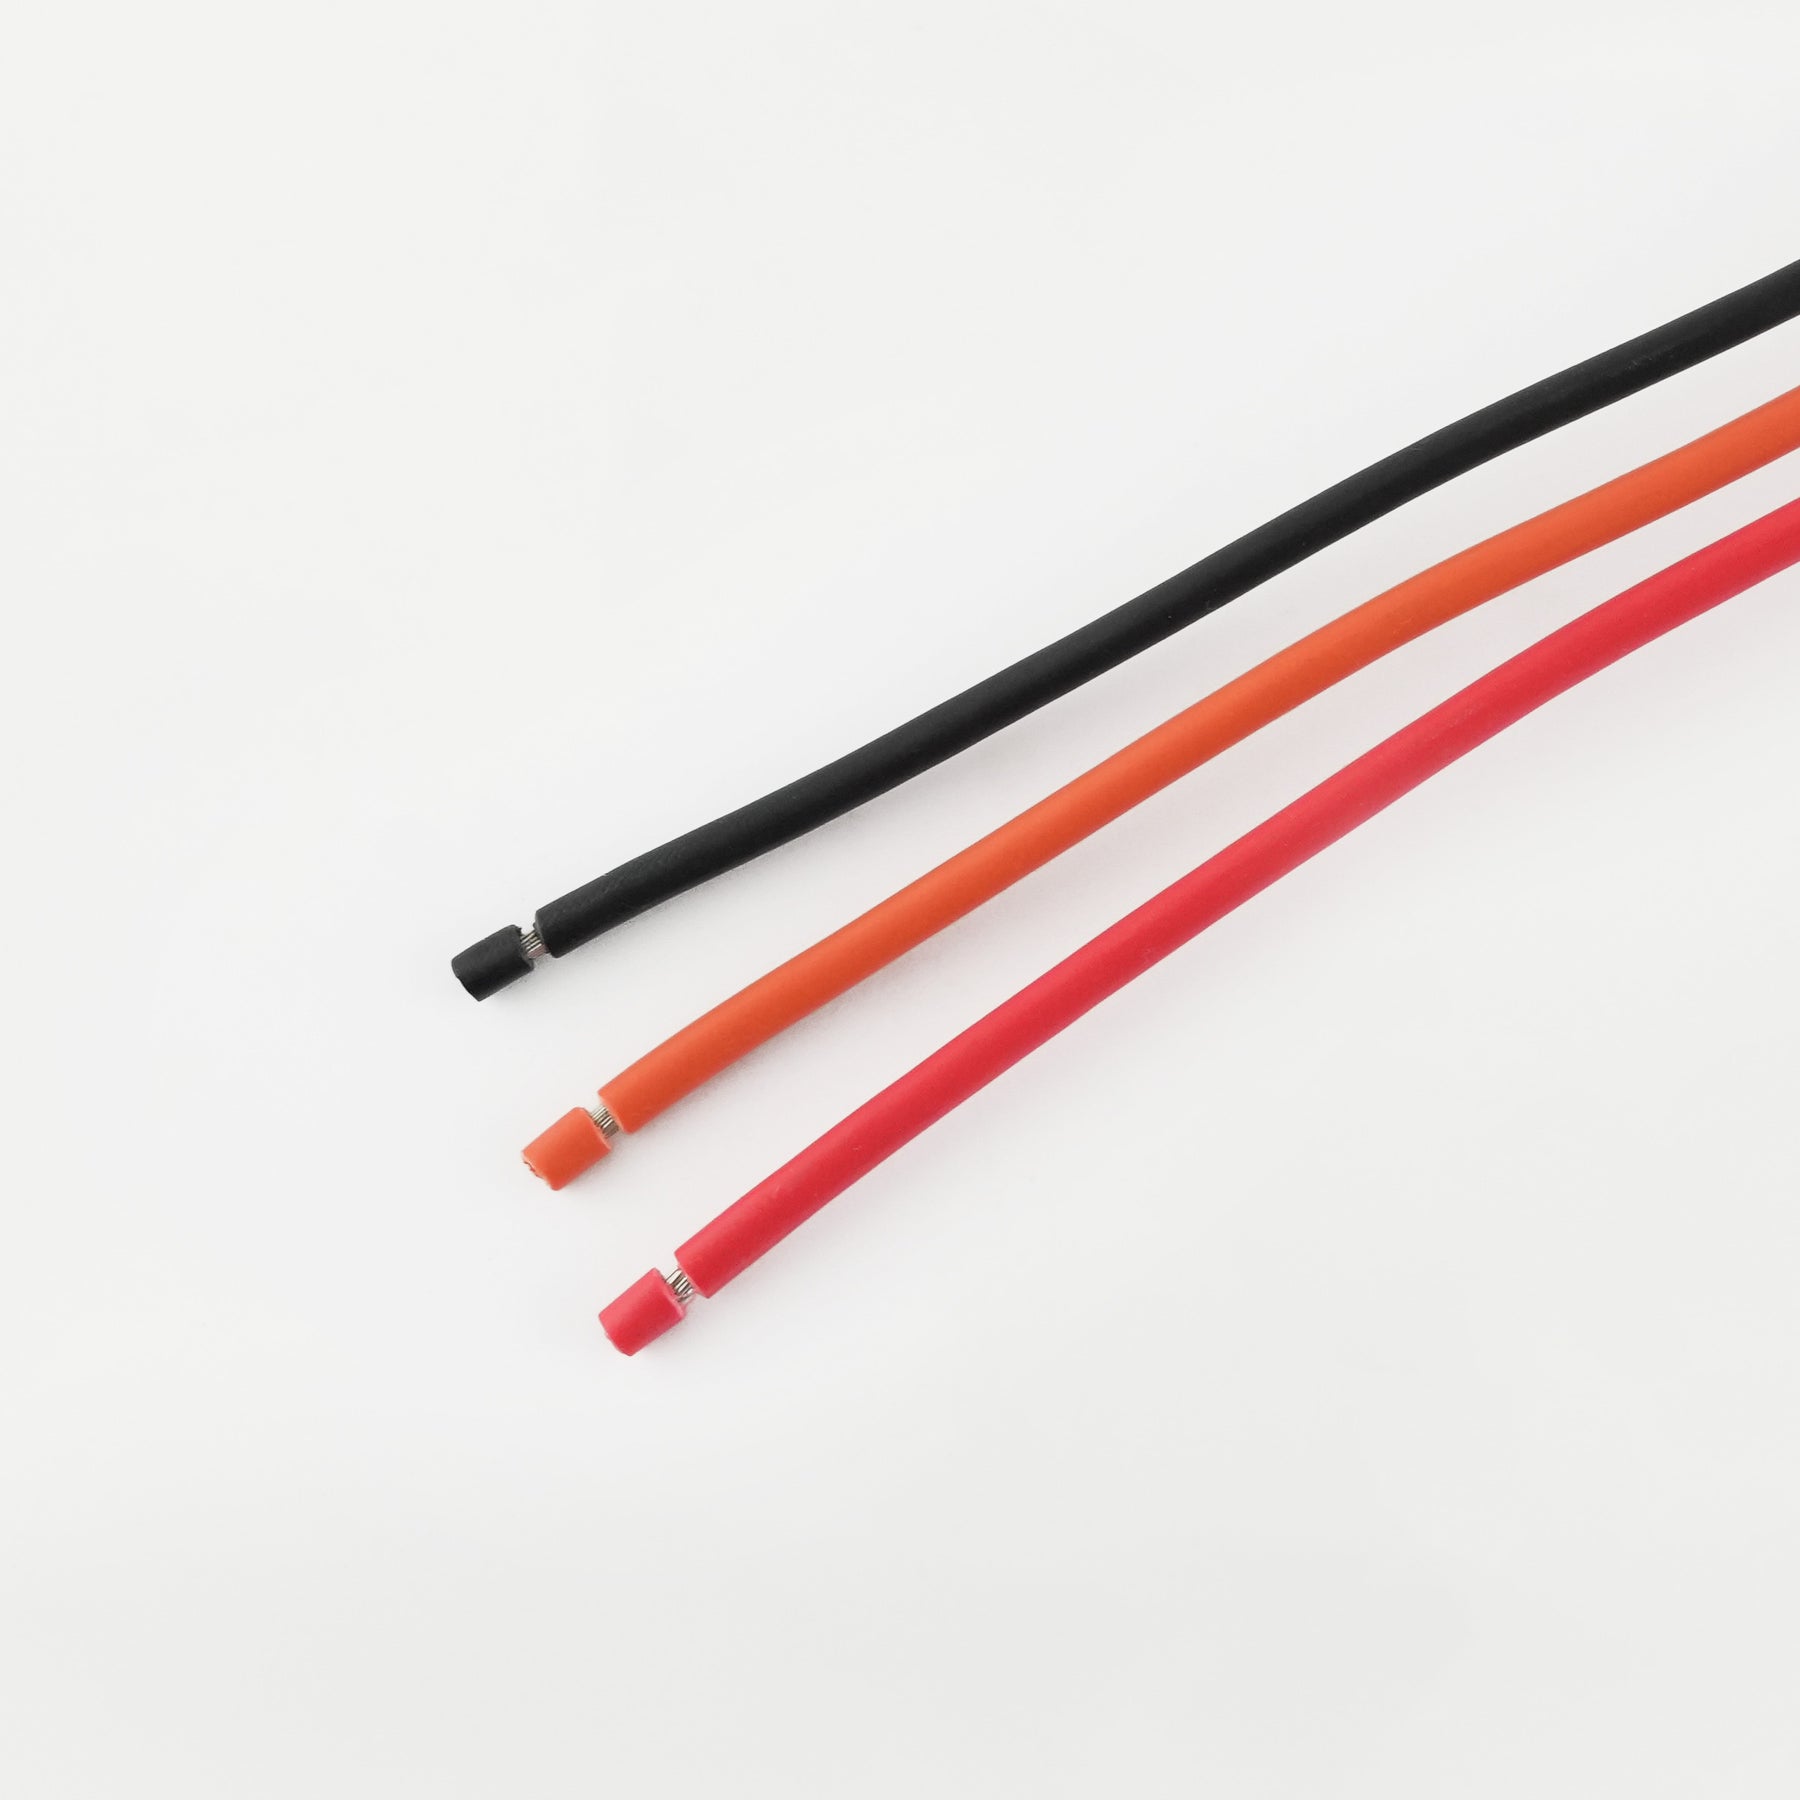 Polaris Pulse Busbar Pigtail Harness showing wire that wire colors follow suit with traditional Red – Constant +12V, Orange – Key On +12V, Black – Ground